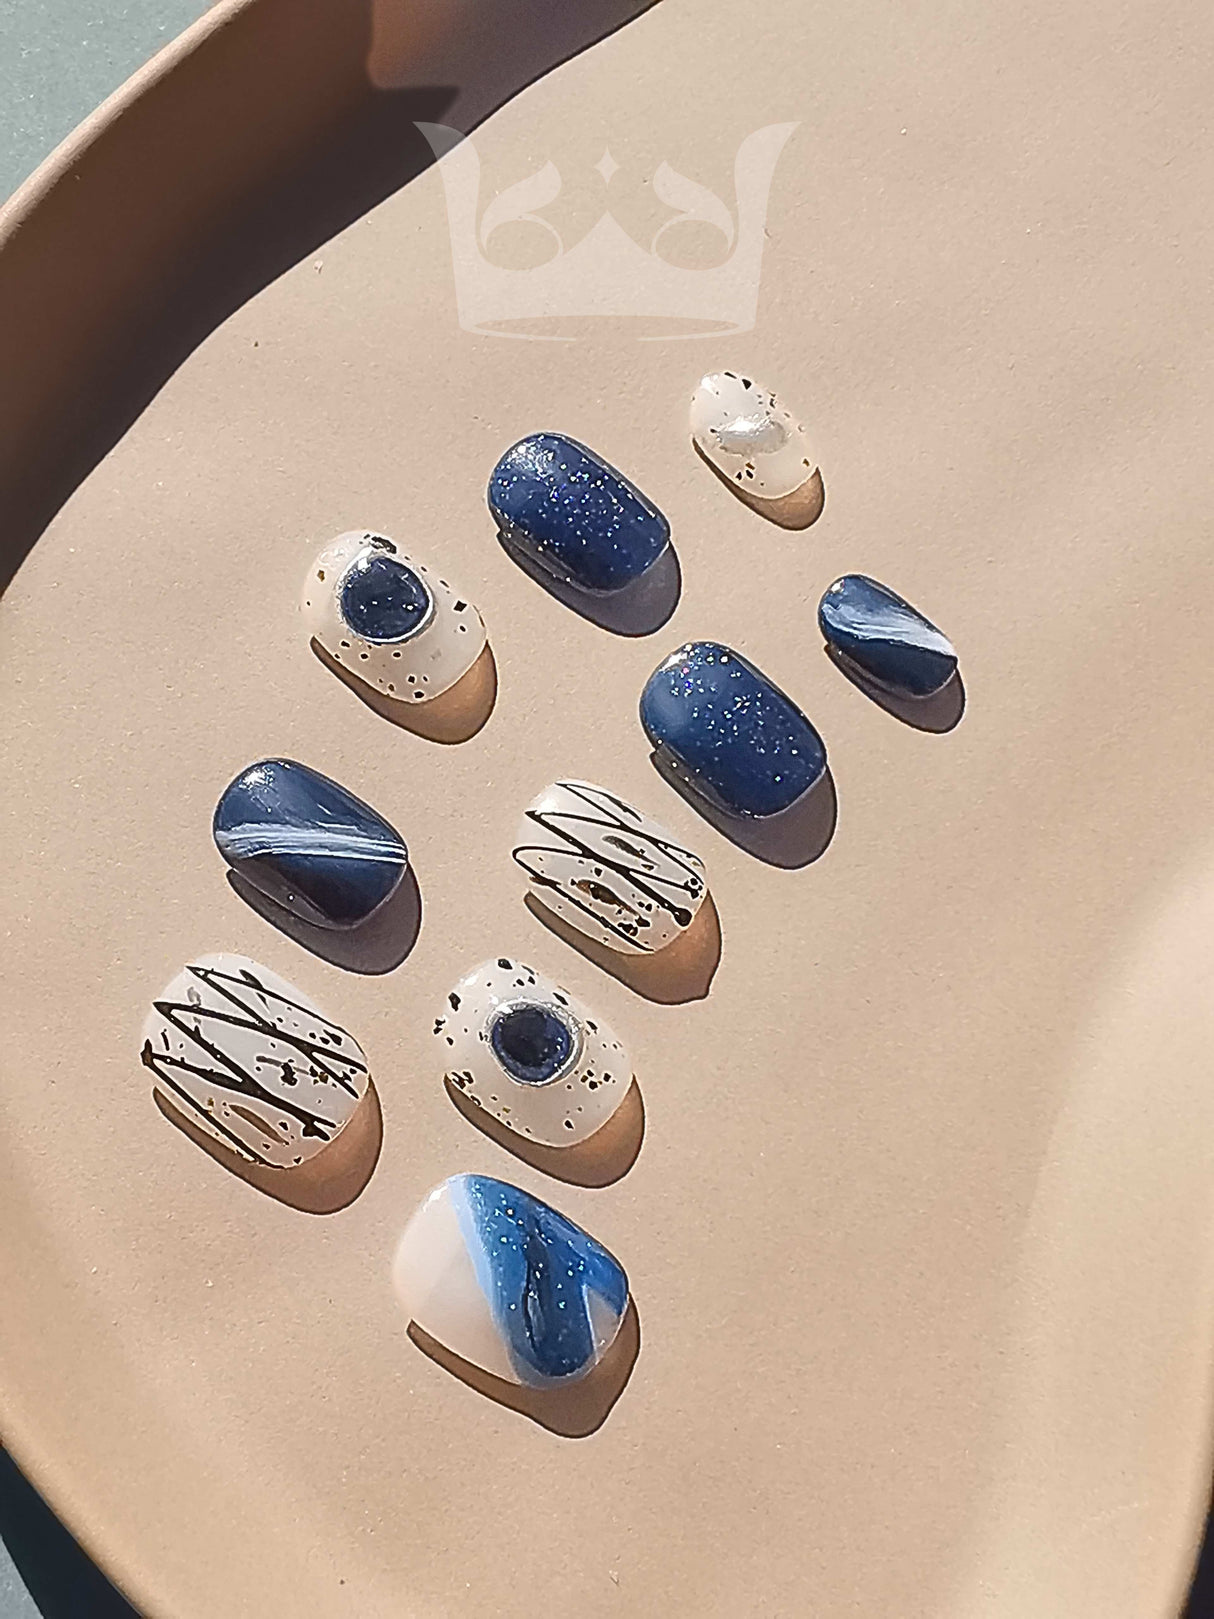 Unclear use case for nails as focus is on painted stones and cute tray. No design elements in nails, only for flat surface crafts.